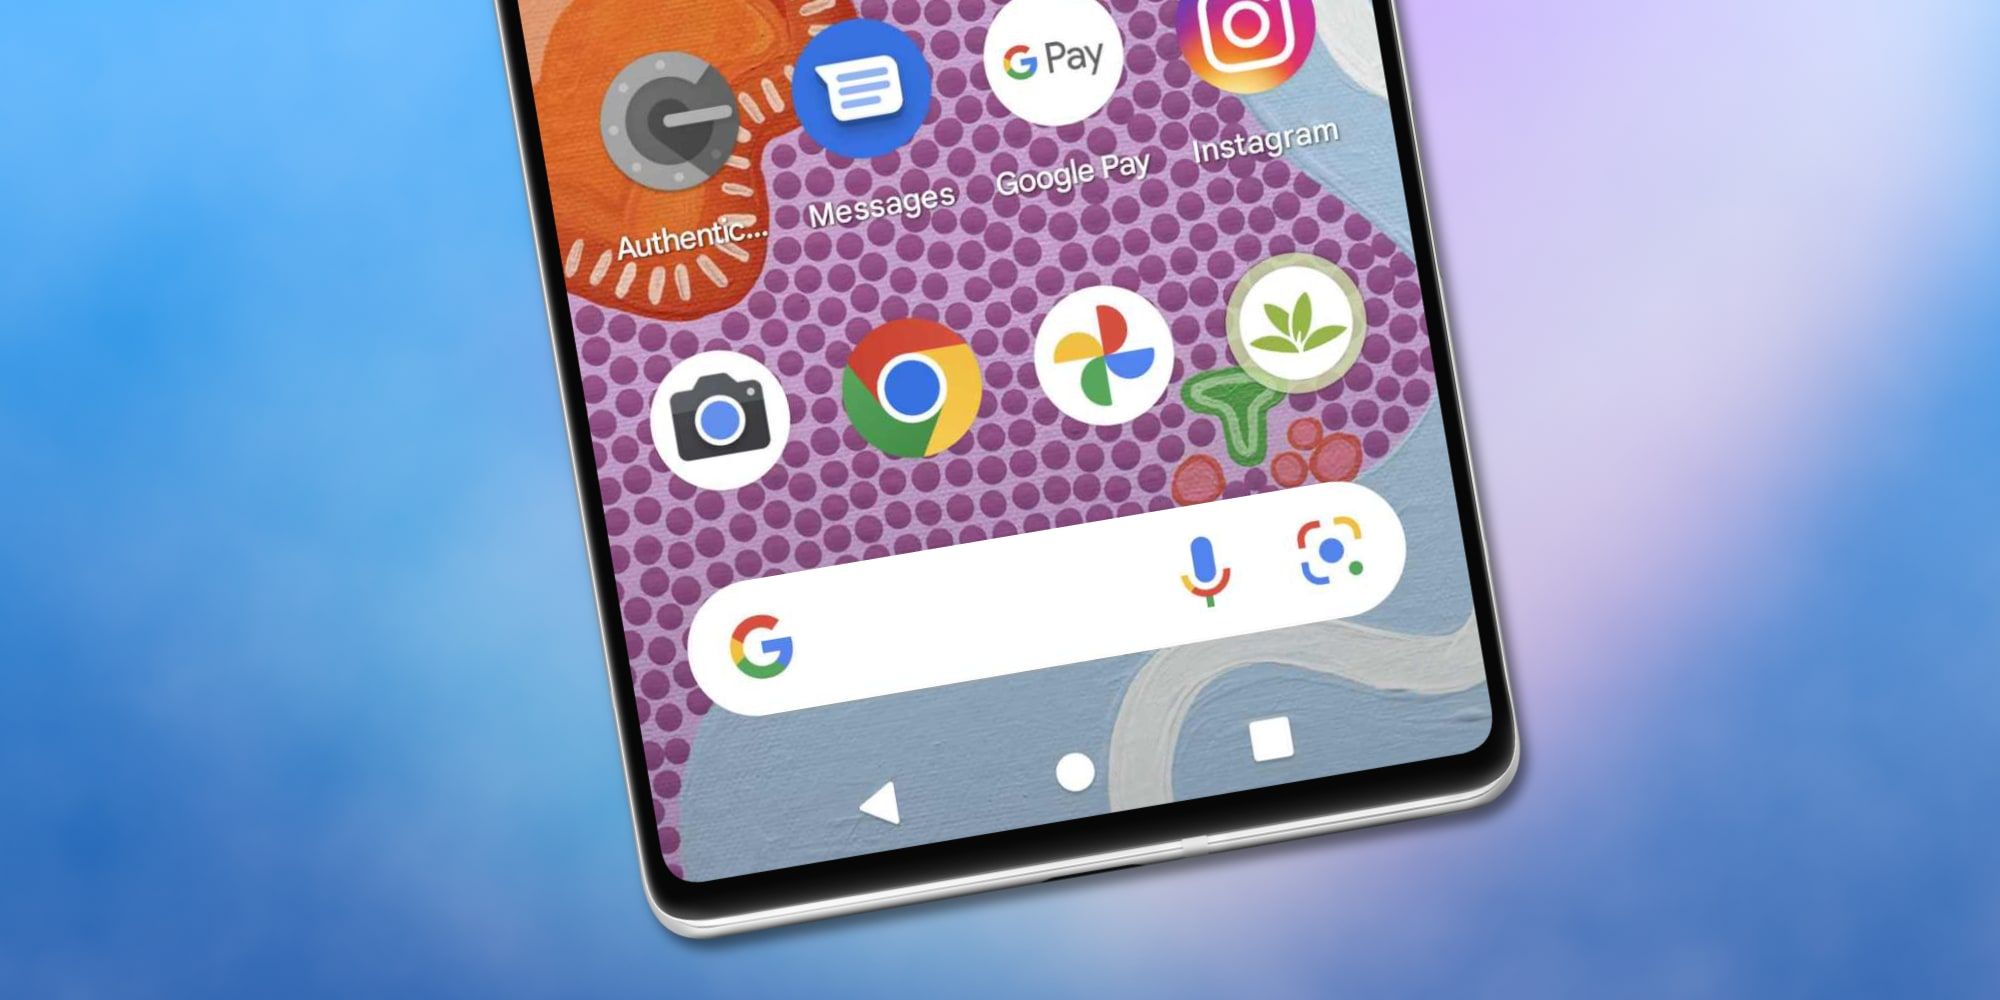 Switch Your Pixel To Button Navigation To Avoid The Swipe Up Glitch